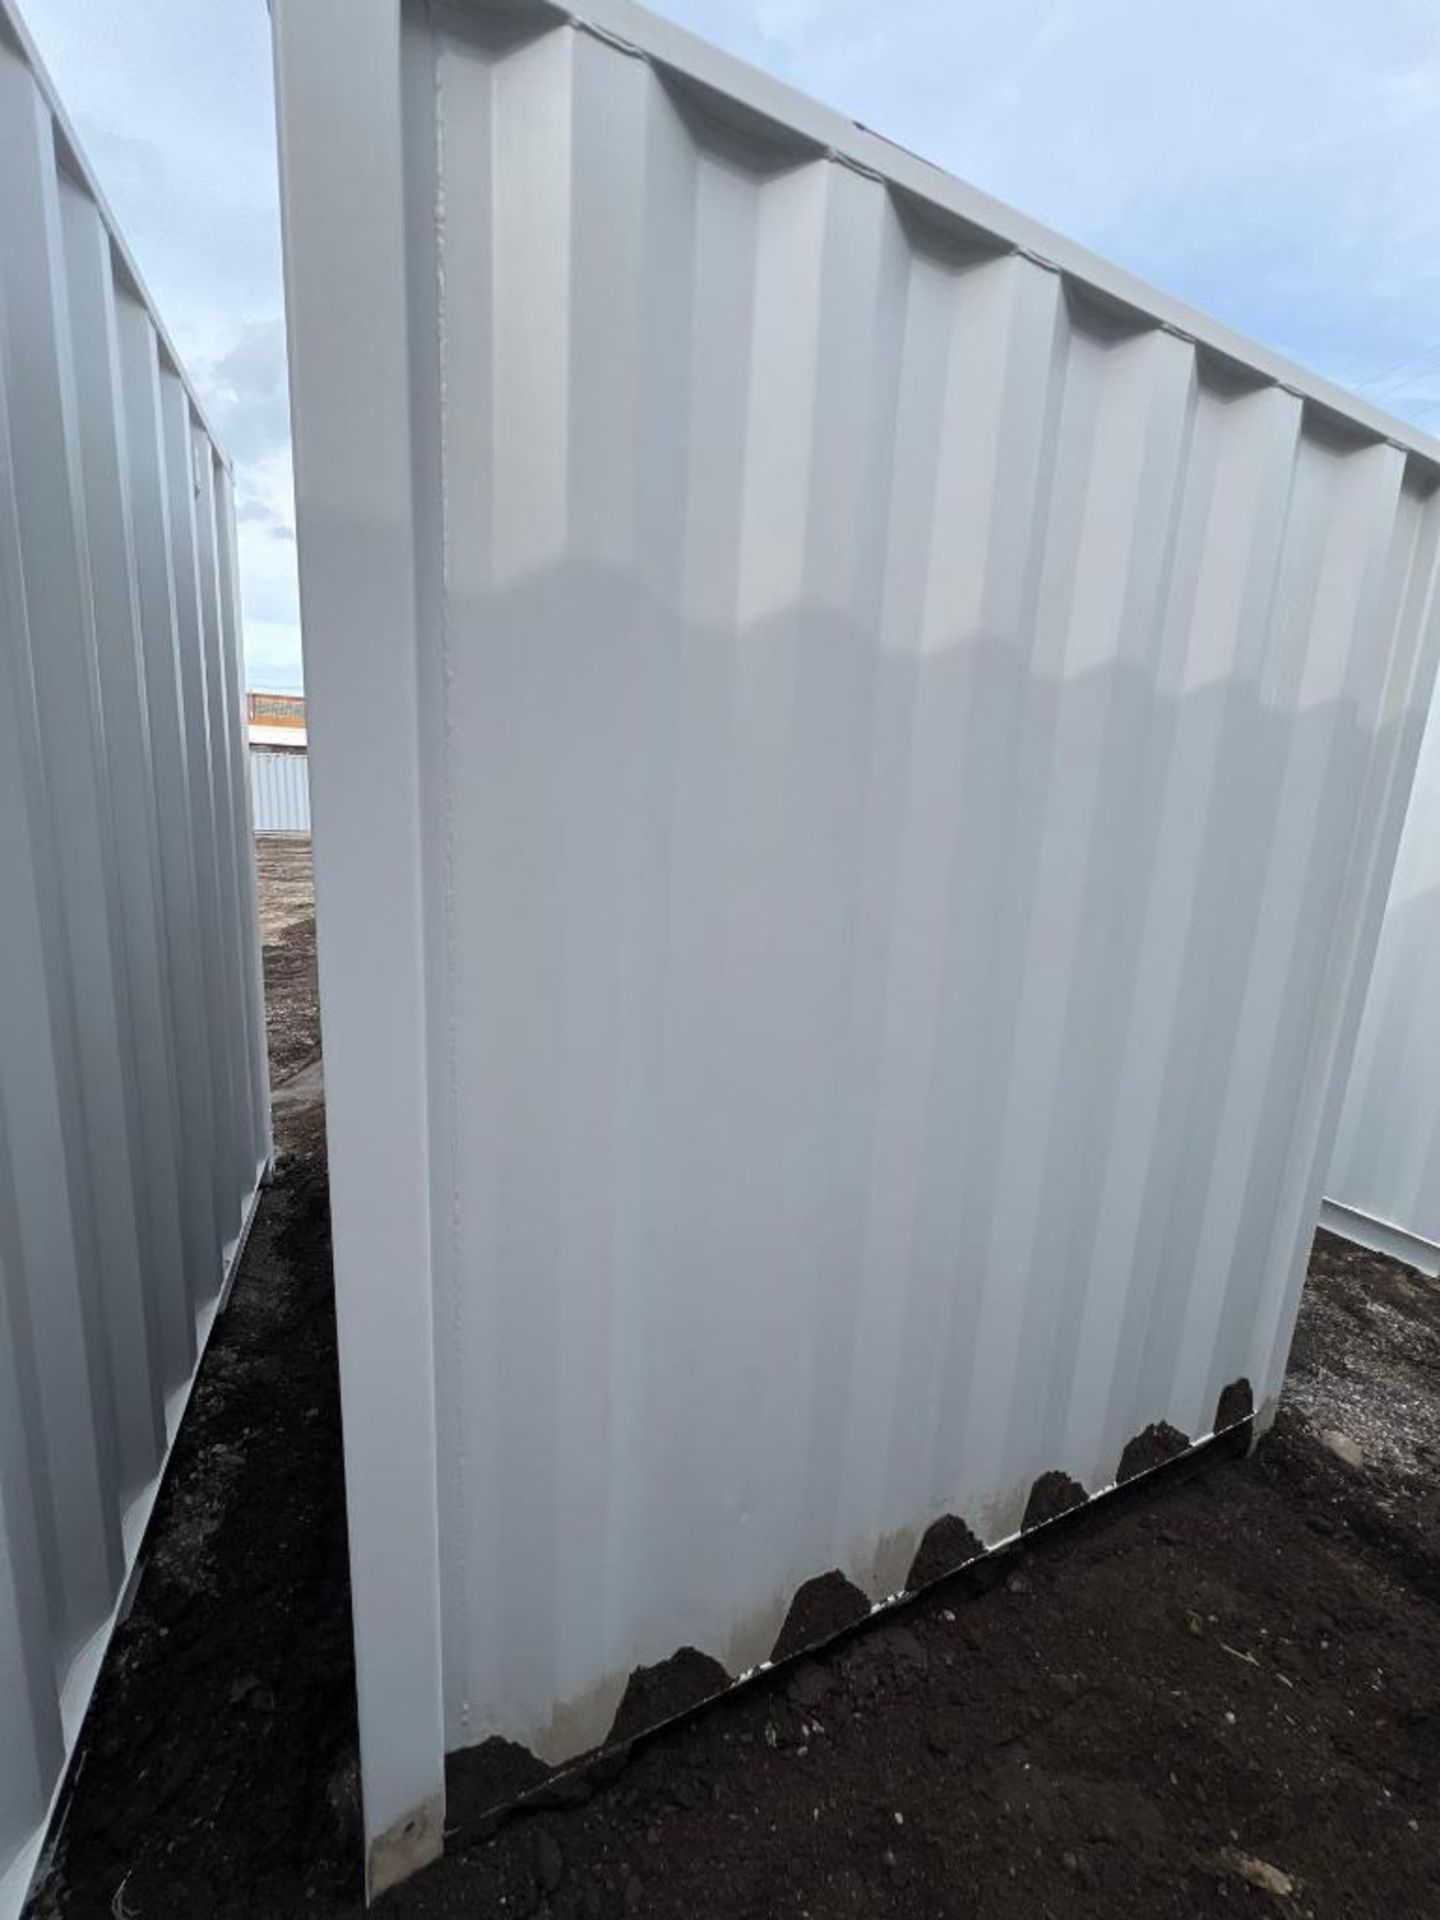 New Chery 8ft Steel Shipping Container/Office - Image 4 of 4